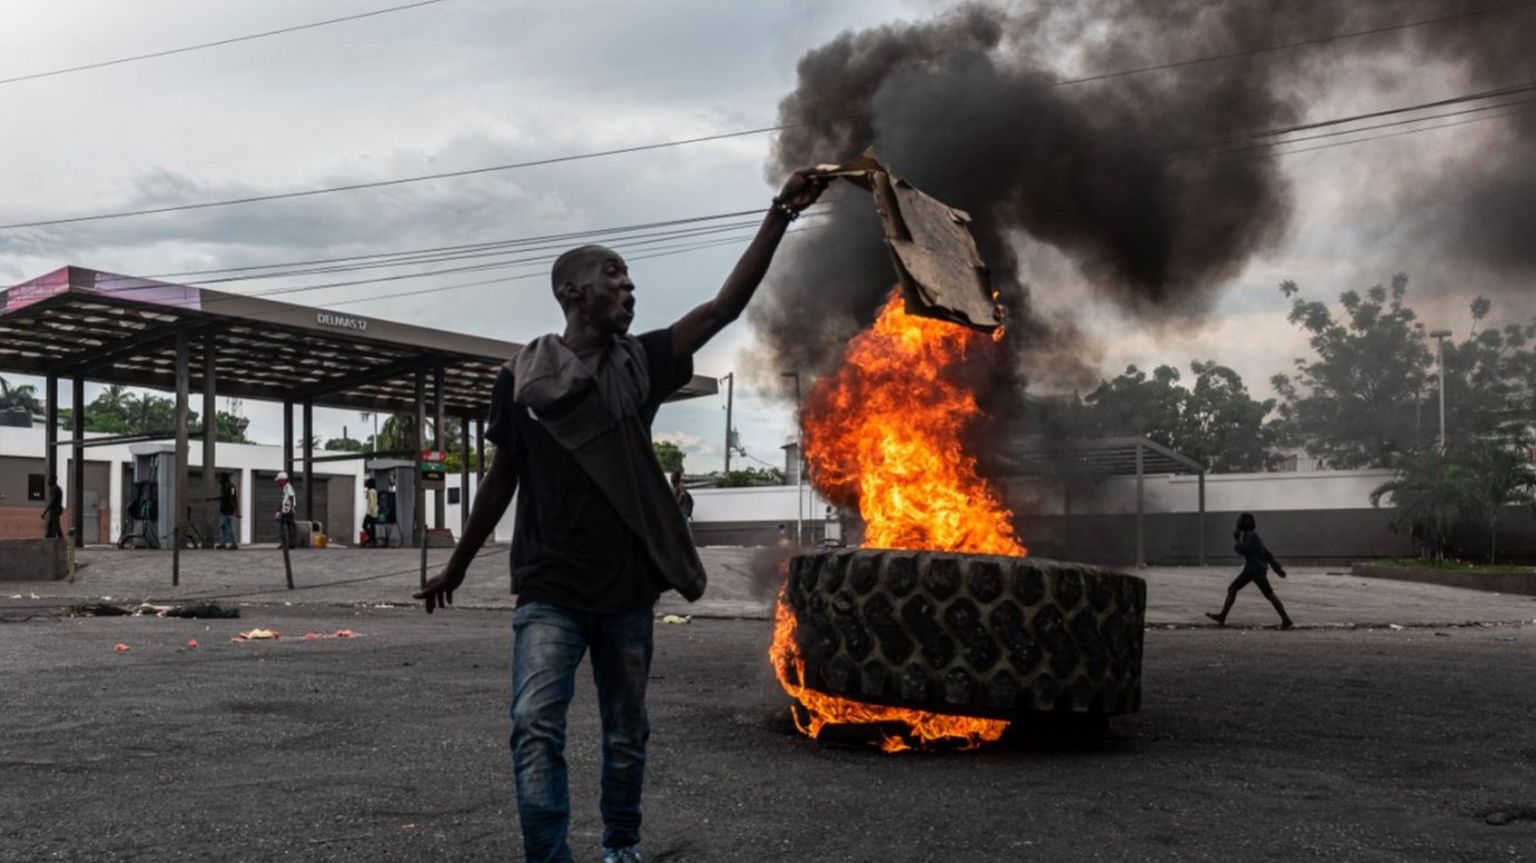 A man with a burning tyre in the background